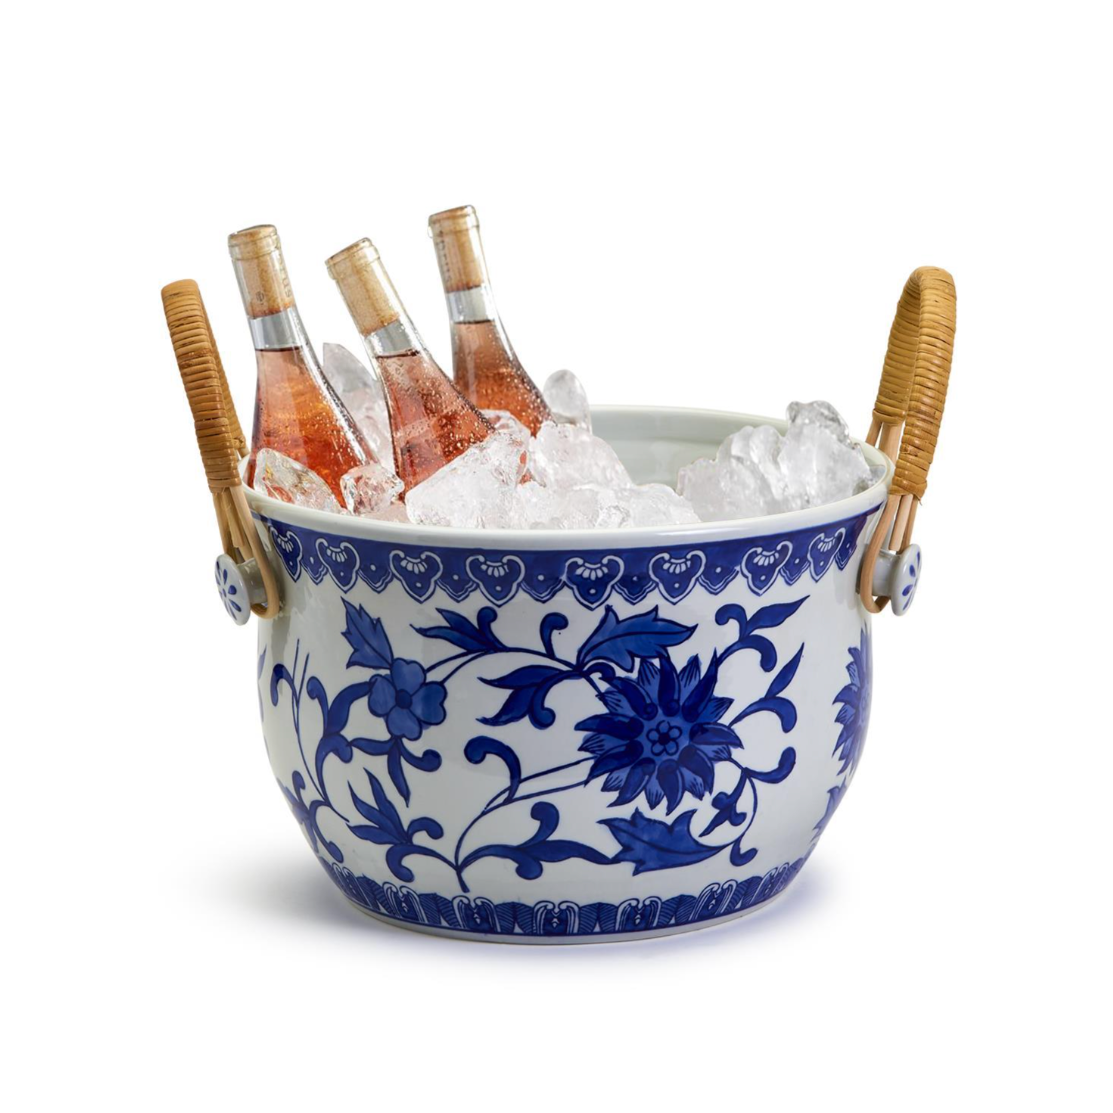 Chinoiserie Blue and White Party Bucket with Bamboo Handles